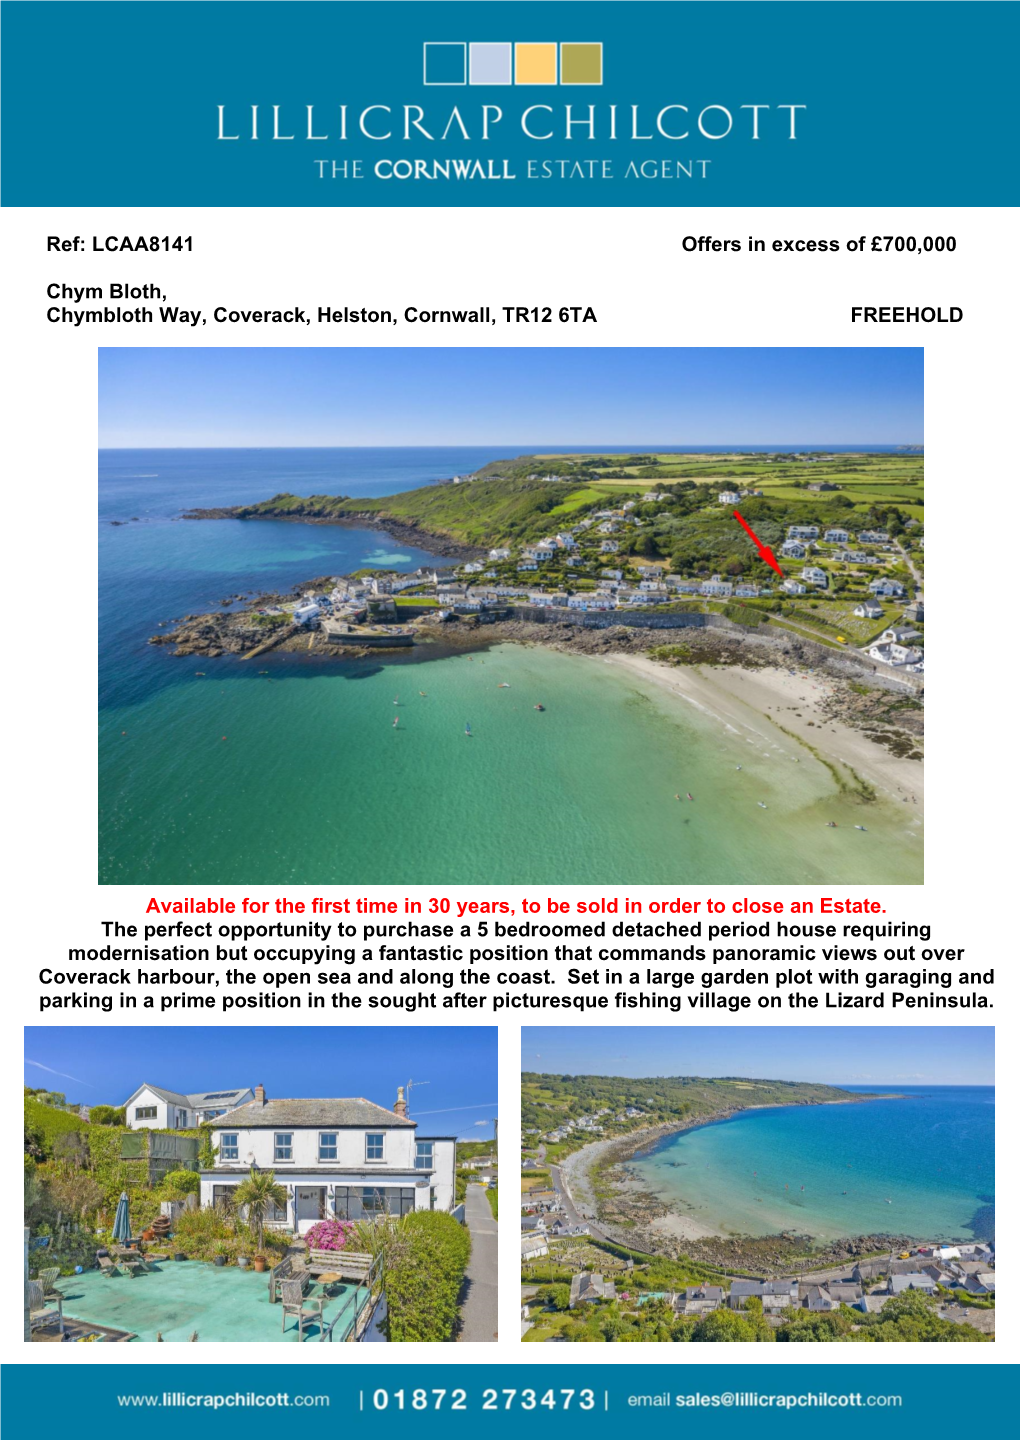 Ref: LCAA8141 Offers in Excess of £700,000 Chym Bloth, Chymbloth